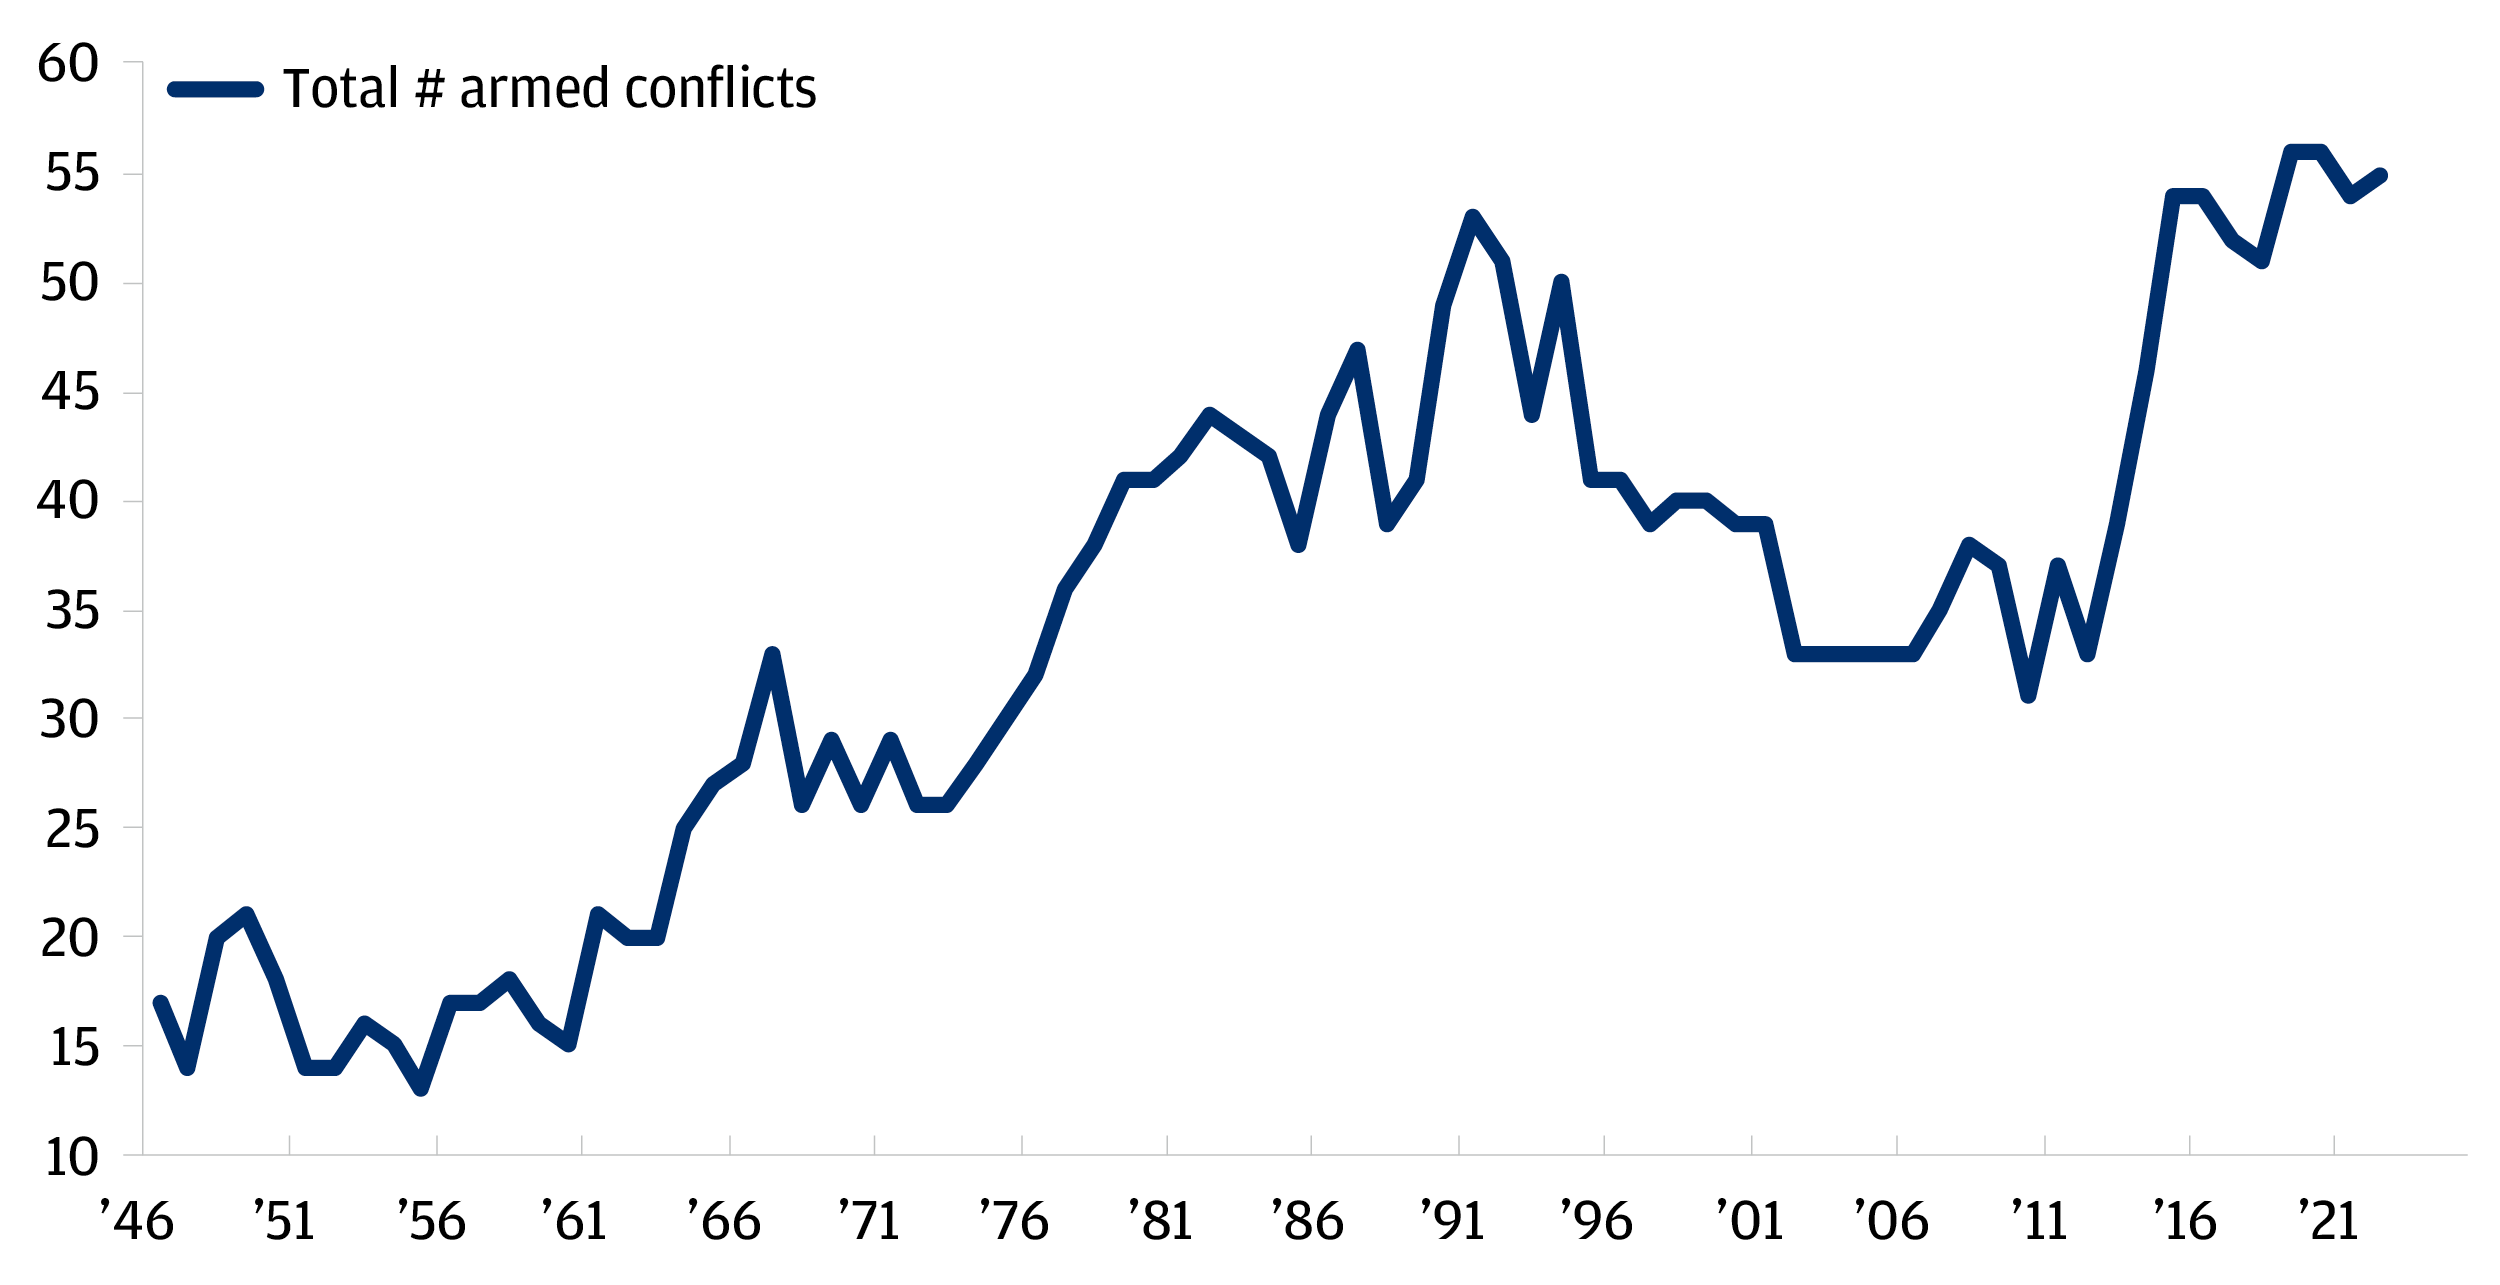 This chart shows the total number of global armed conflicts from 1946 through 2021. 